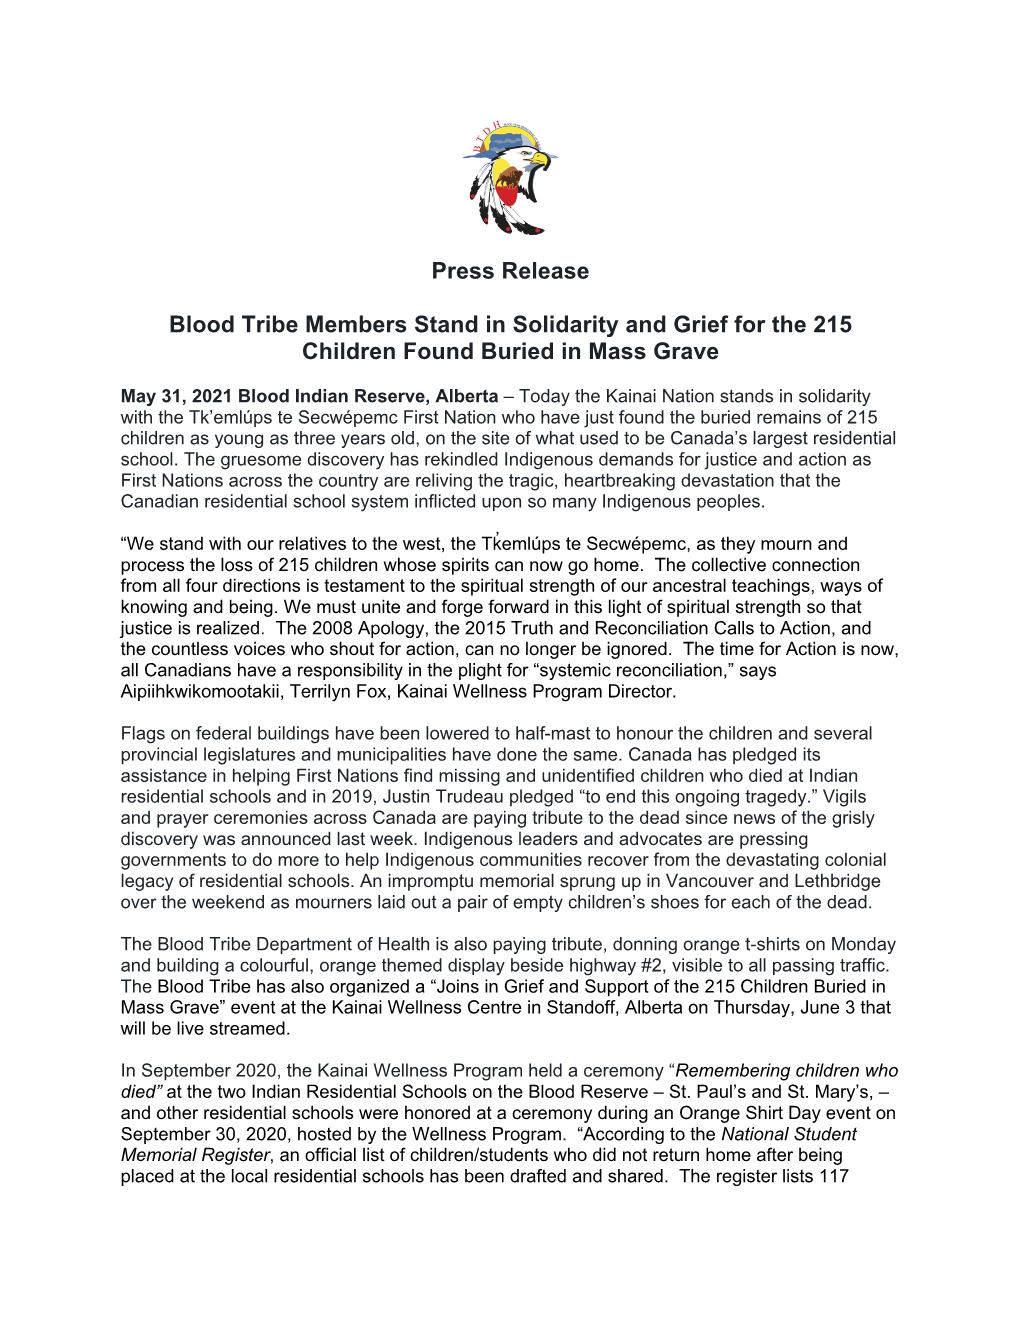 Press Release Blood Tribe Members Stand in Solidarity and Grief for The